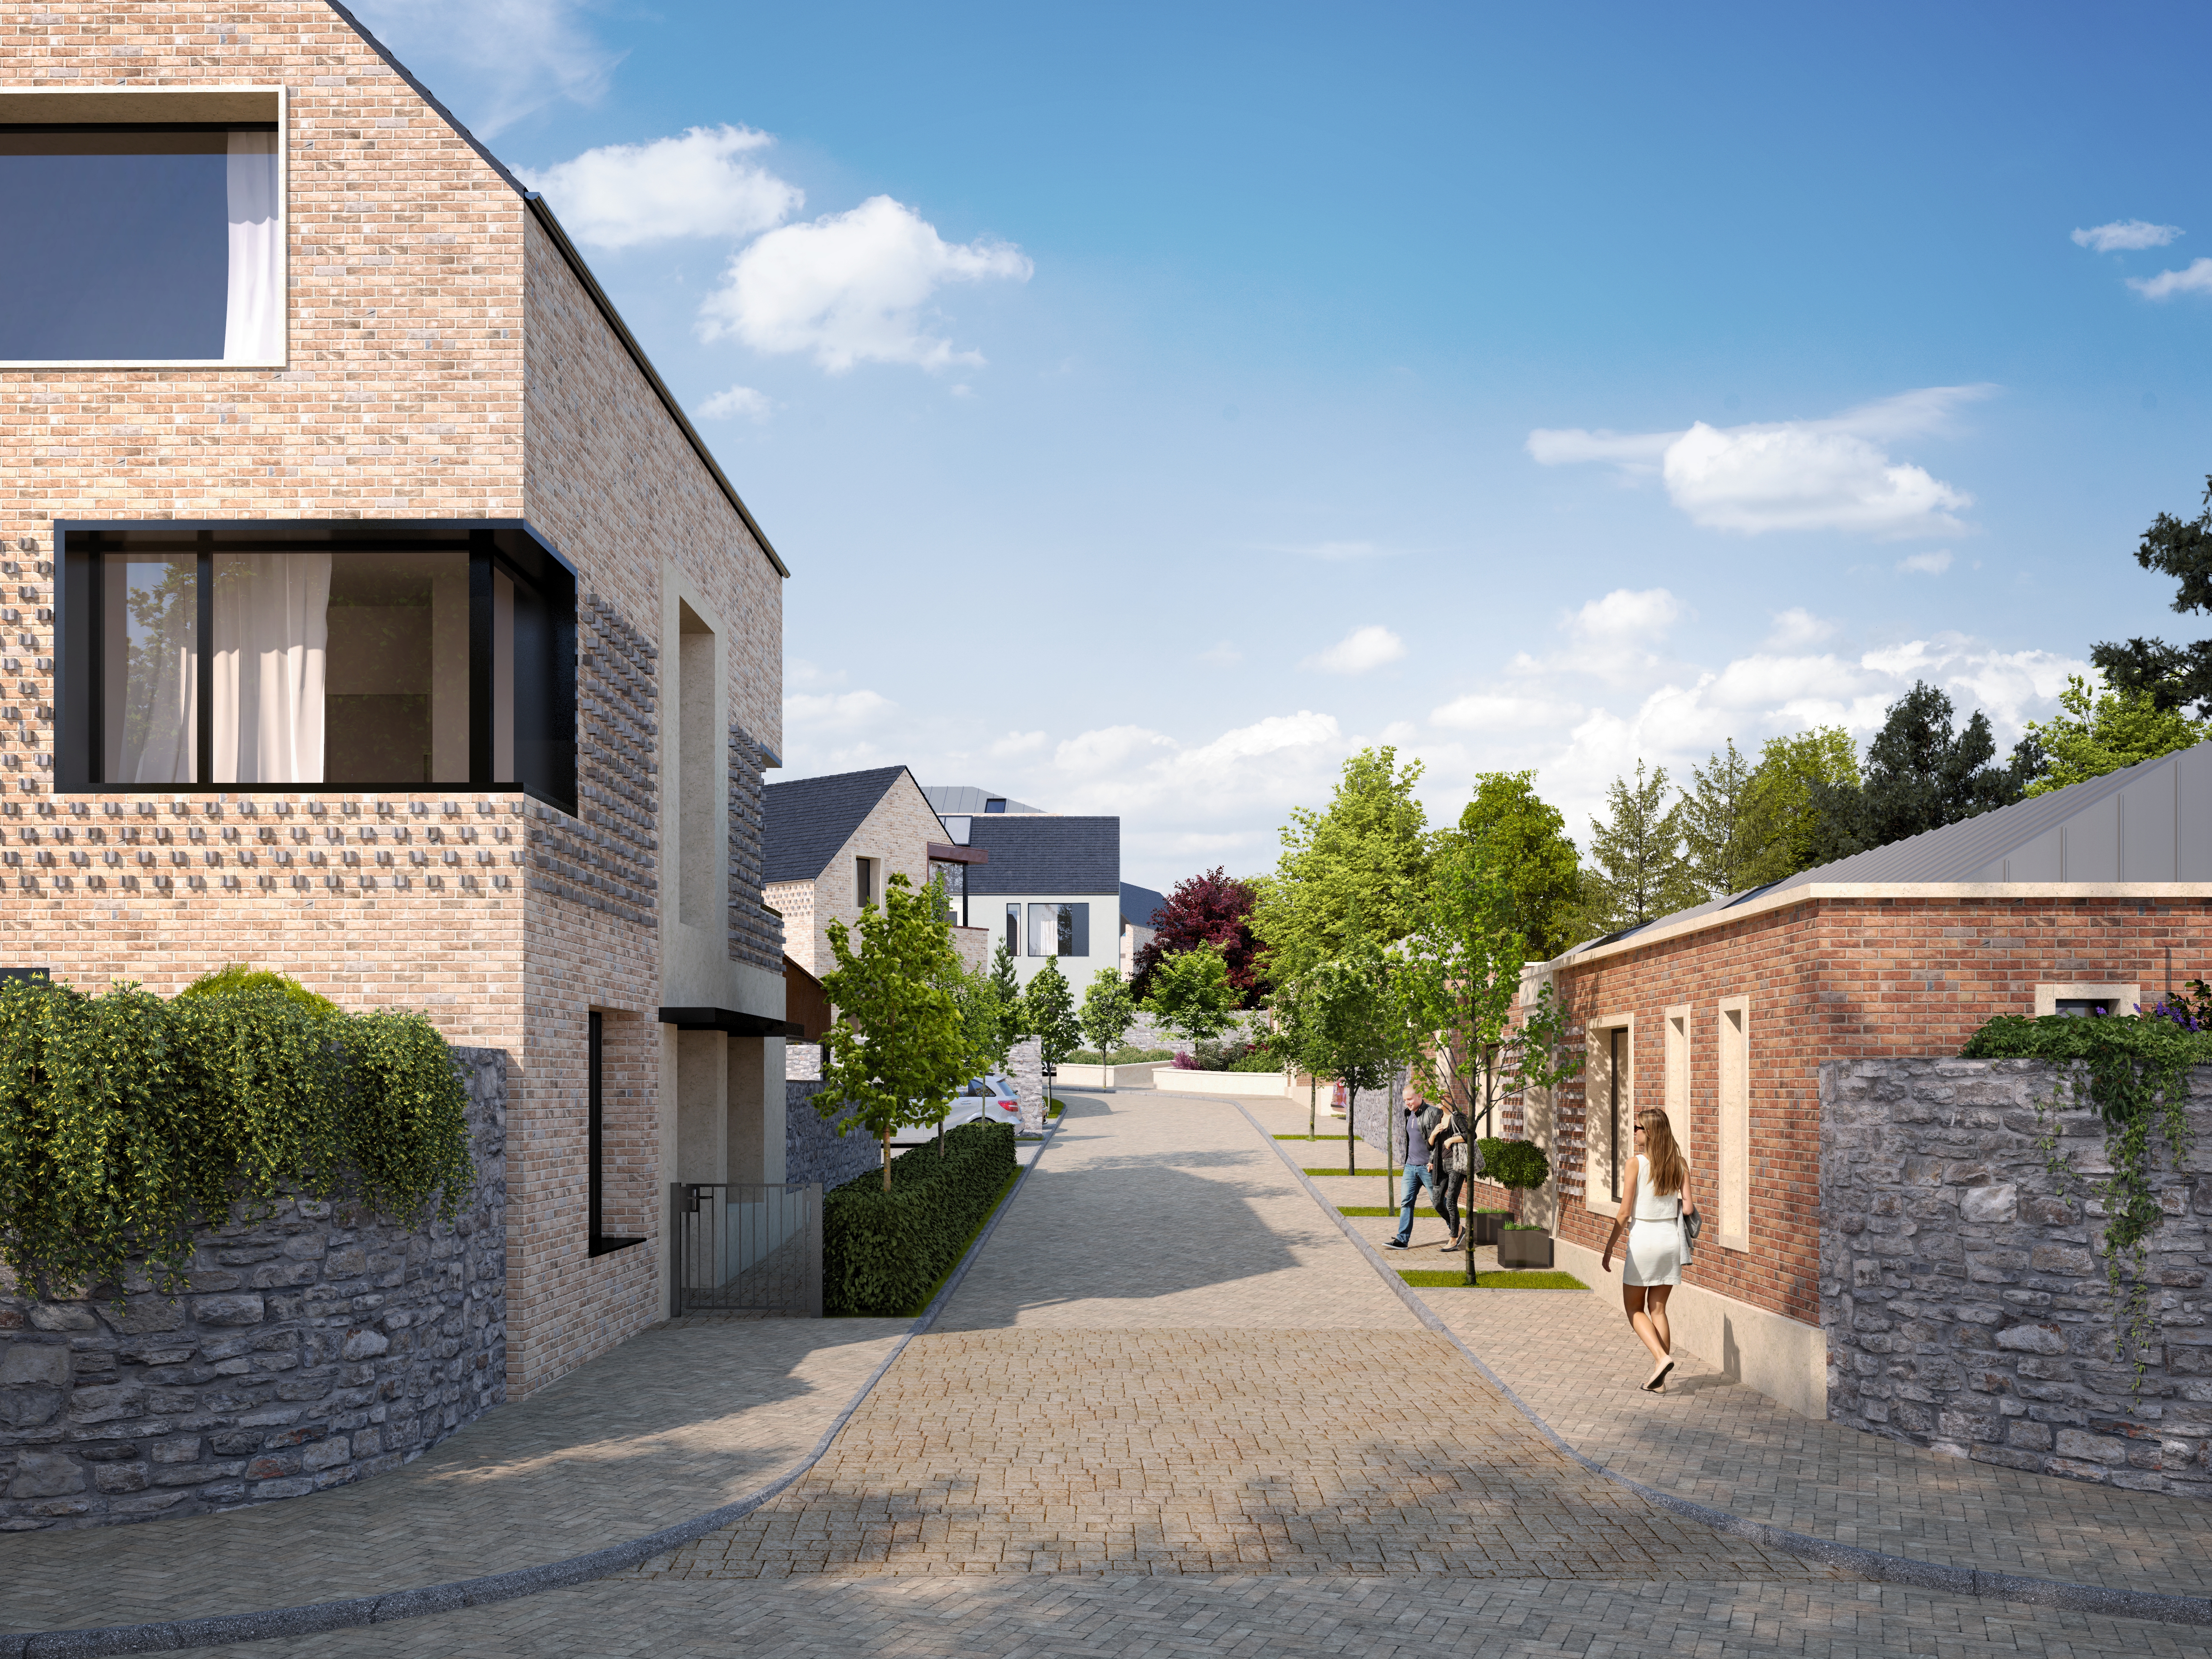 Manor View, Architectural Visualisation, CGI, 3D Animation, Street View, People walking on pavement, blue sky, road into horizon, two storey building on the left, 1 storey red brick bungalow on the right, housing estate on the horizon. https://gnet.ie/